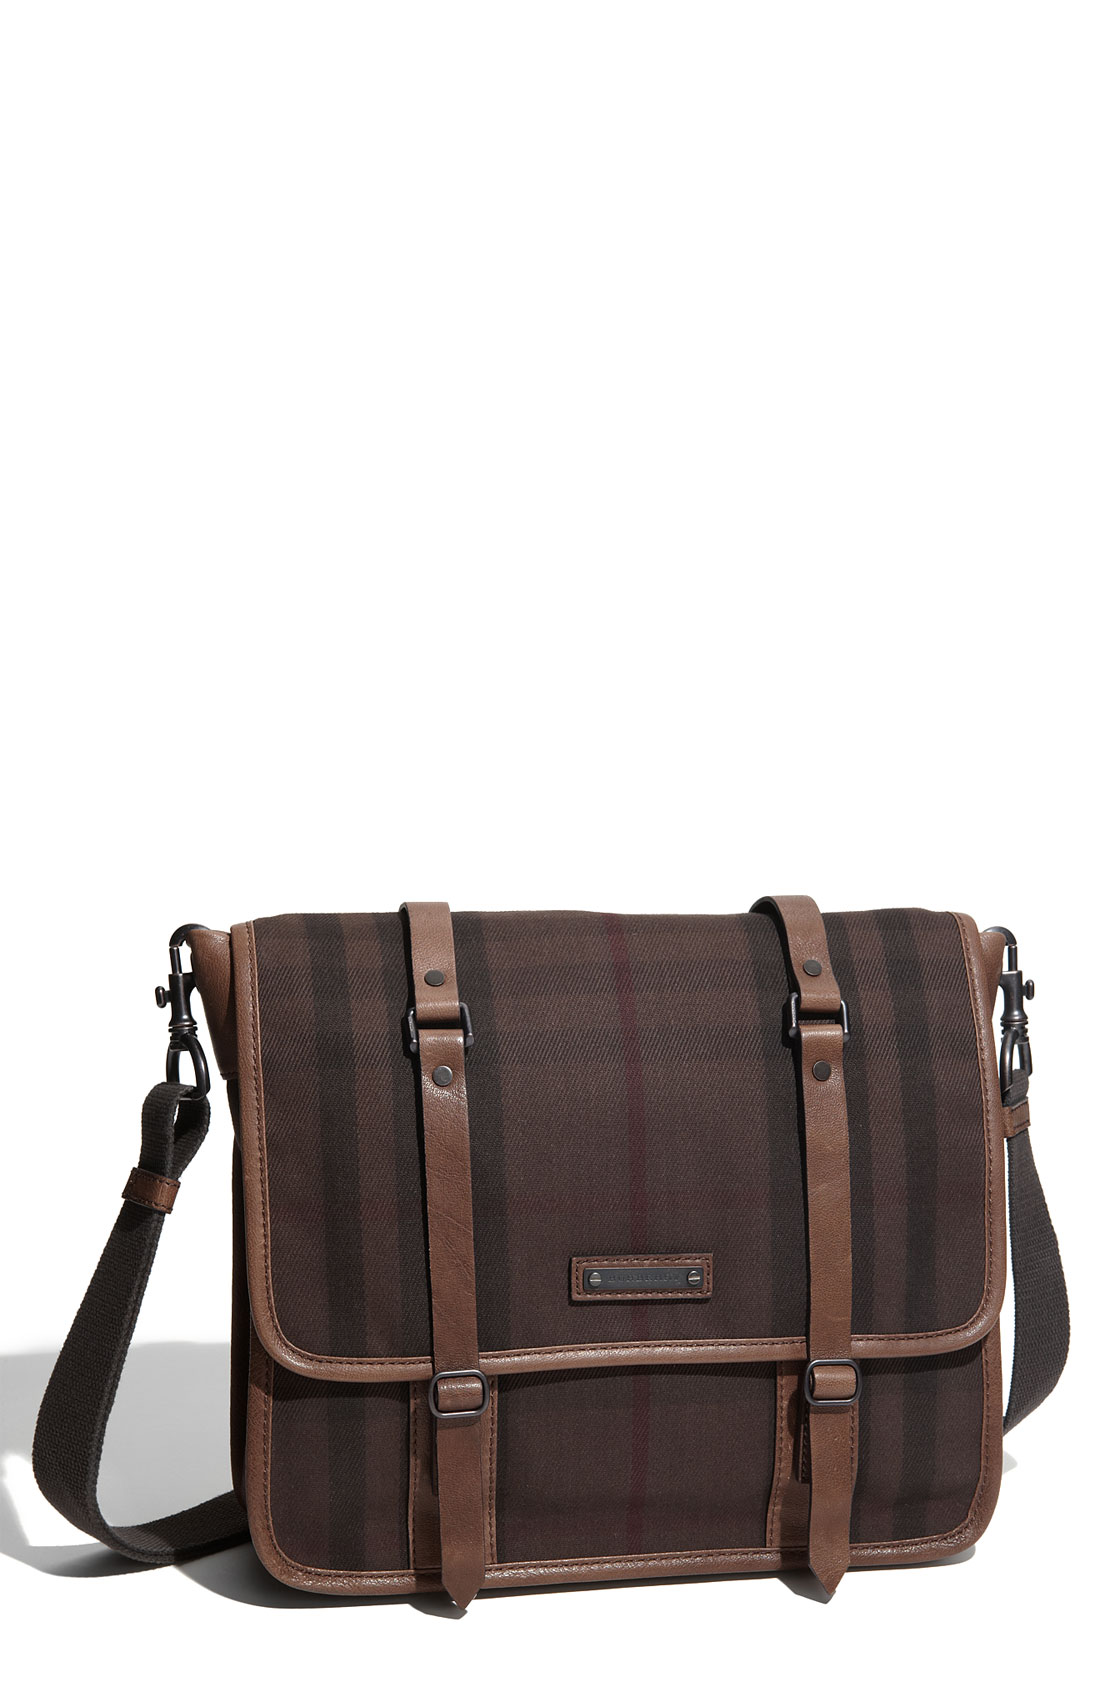 Burberry Check Messenger Bag in Brown for Men (chocolate) | Lyst